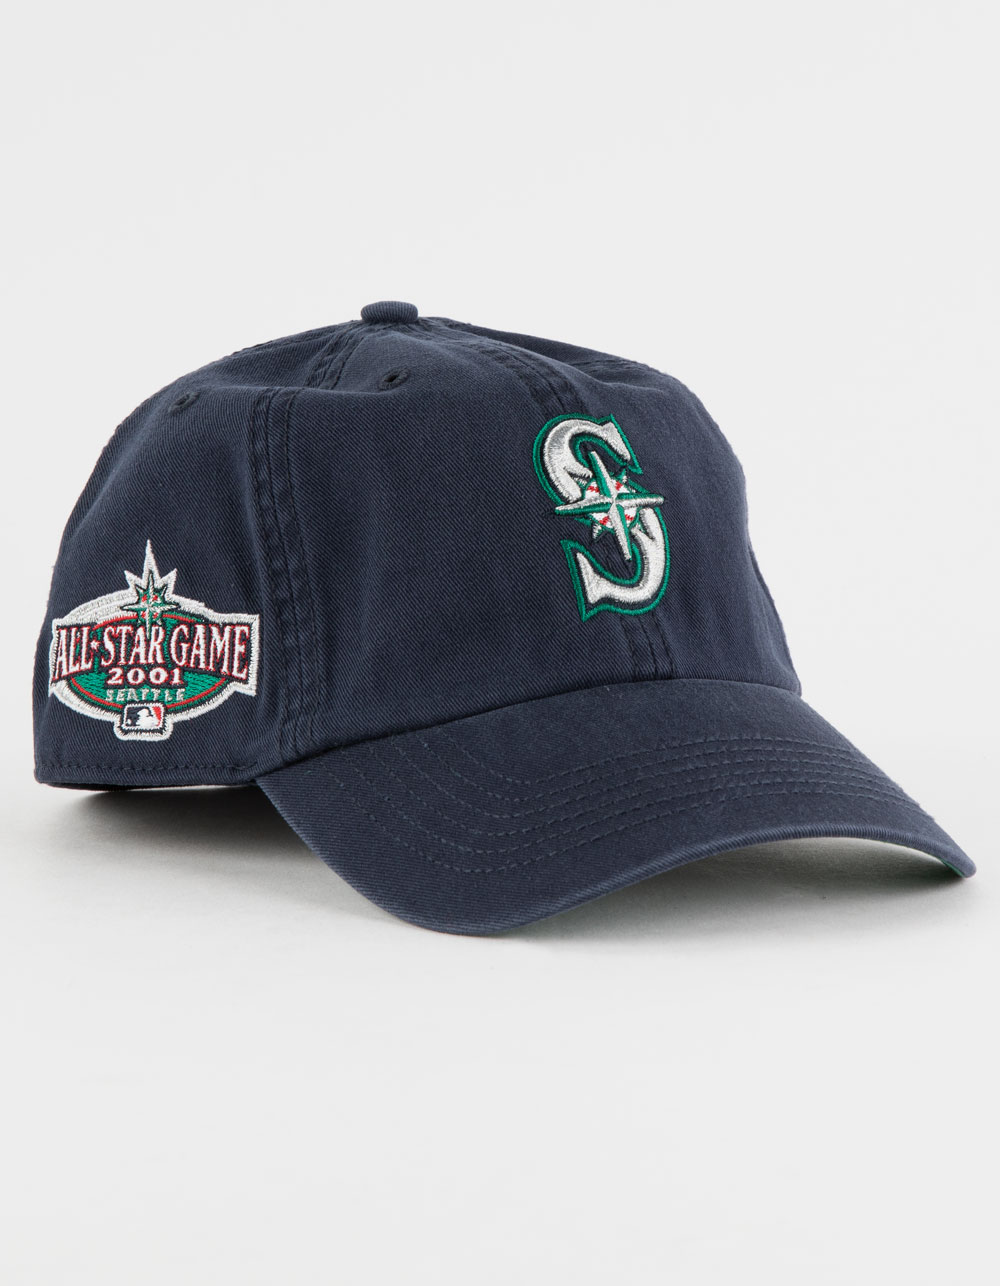 47, Accessories, Pink Seattle Mariners Baseball Hat